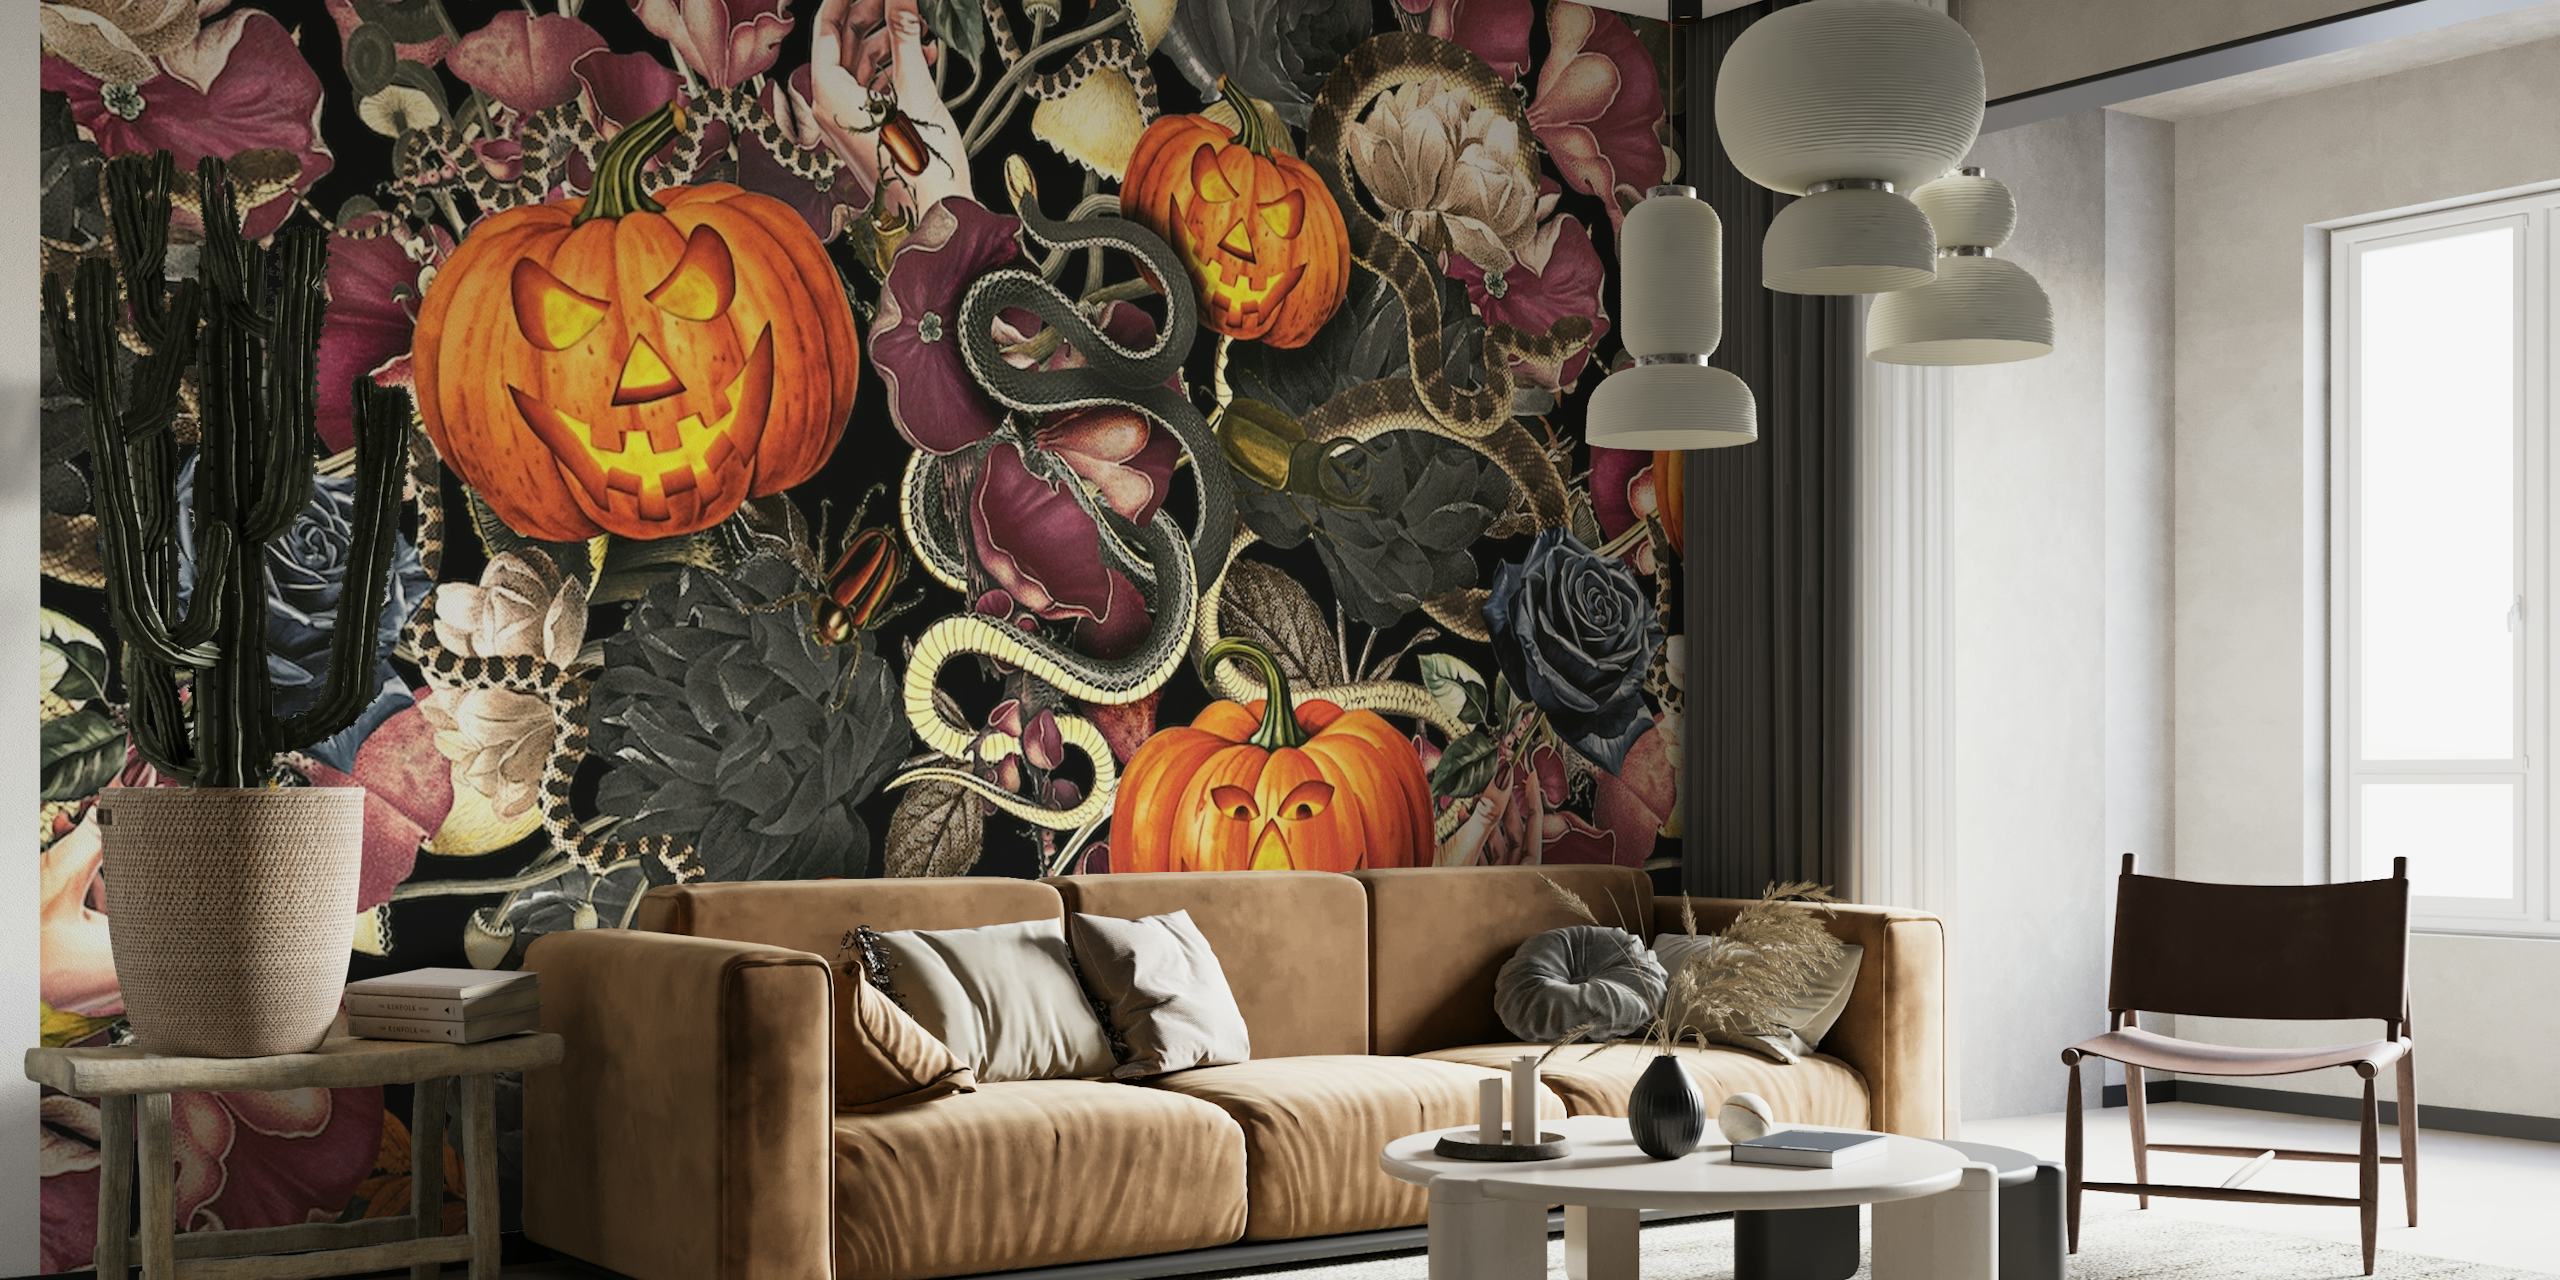 Halloween-themed wall mural with carved pumpkins and snakes on a dark floral background